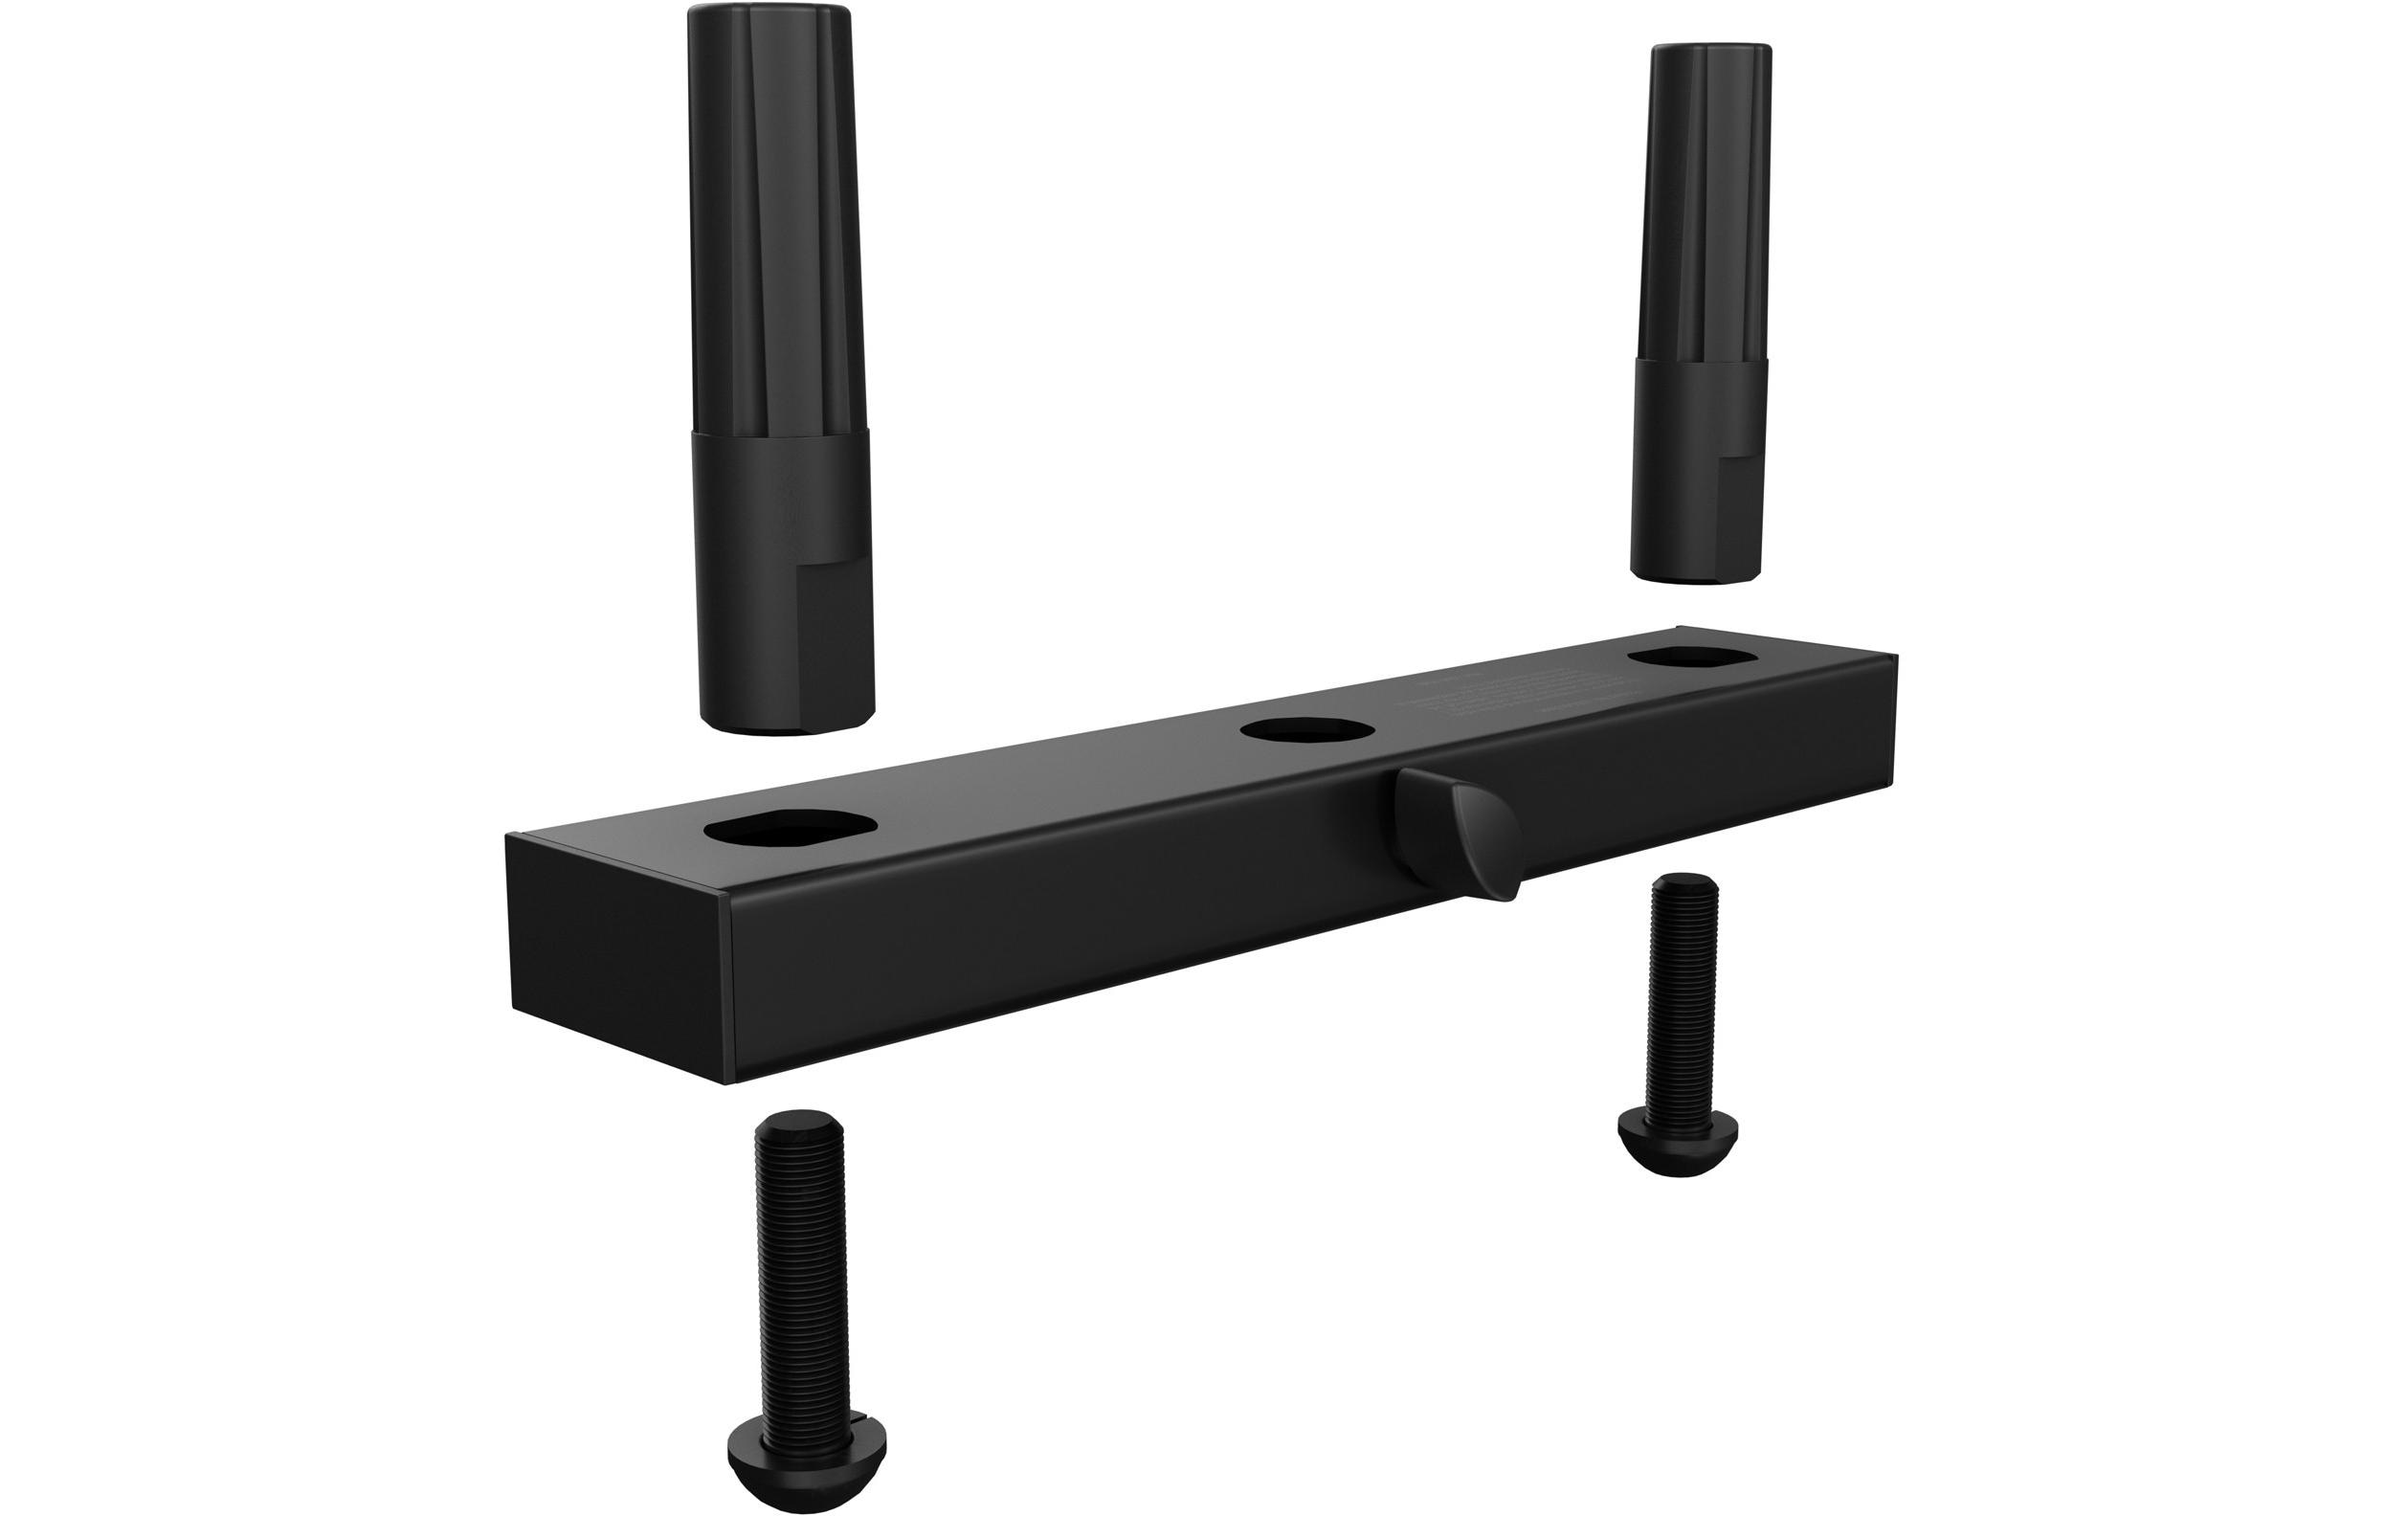 LD Systems Distanzrohr DAVE 10 G4X DUAL STAND – LD Systems DAVE 10 G4X